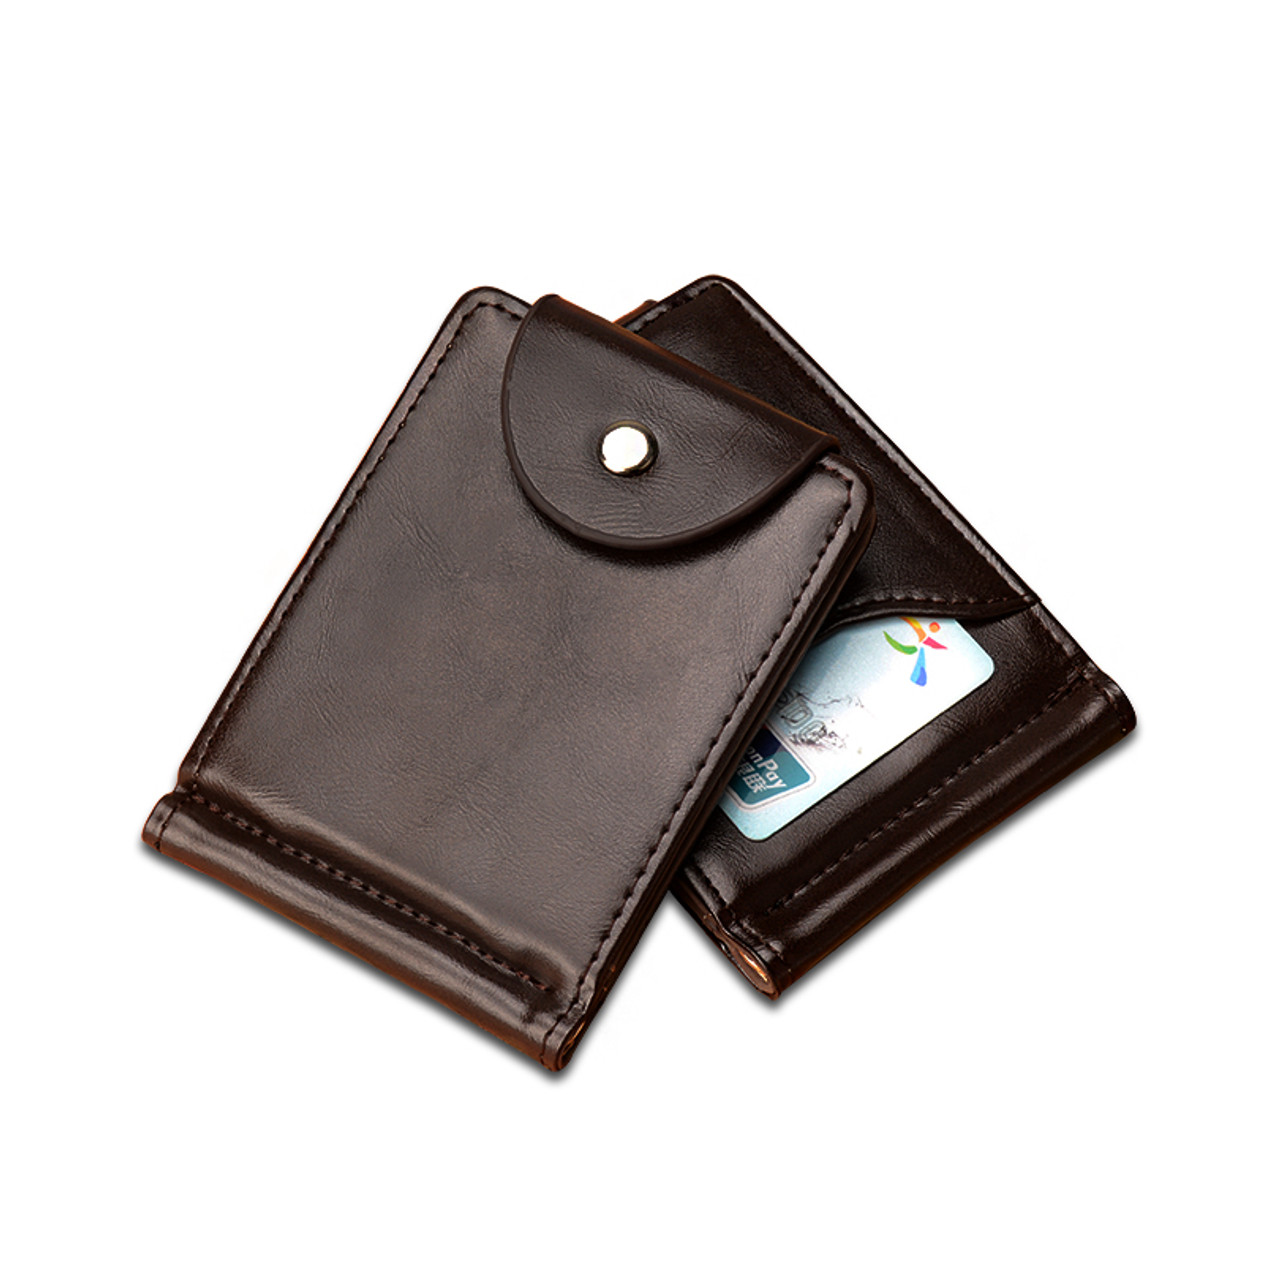 Coheart Top Quality Wallet M!   en Money Clip Mini Wallets Male Vintage Style Brown Grey Hasp Purse Lea!   ther Card Holers With Clamp - 